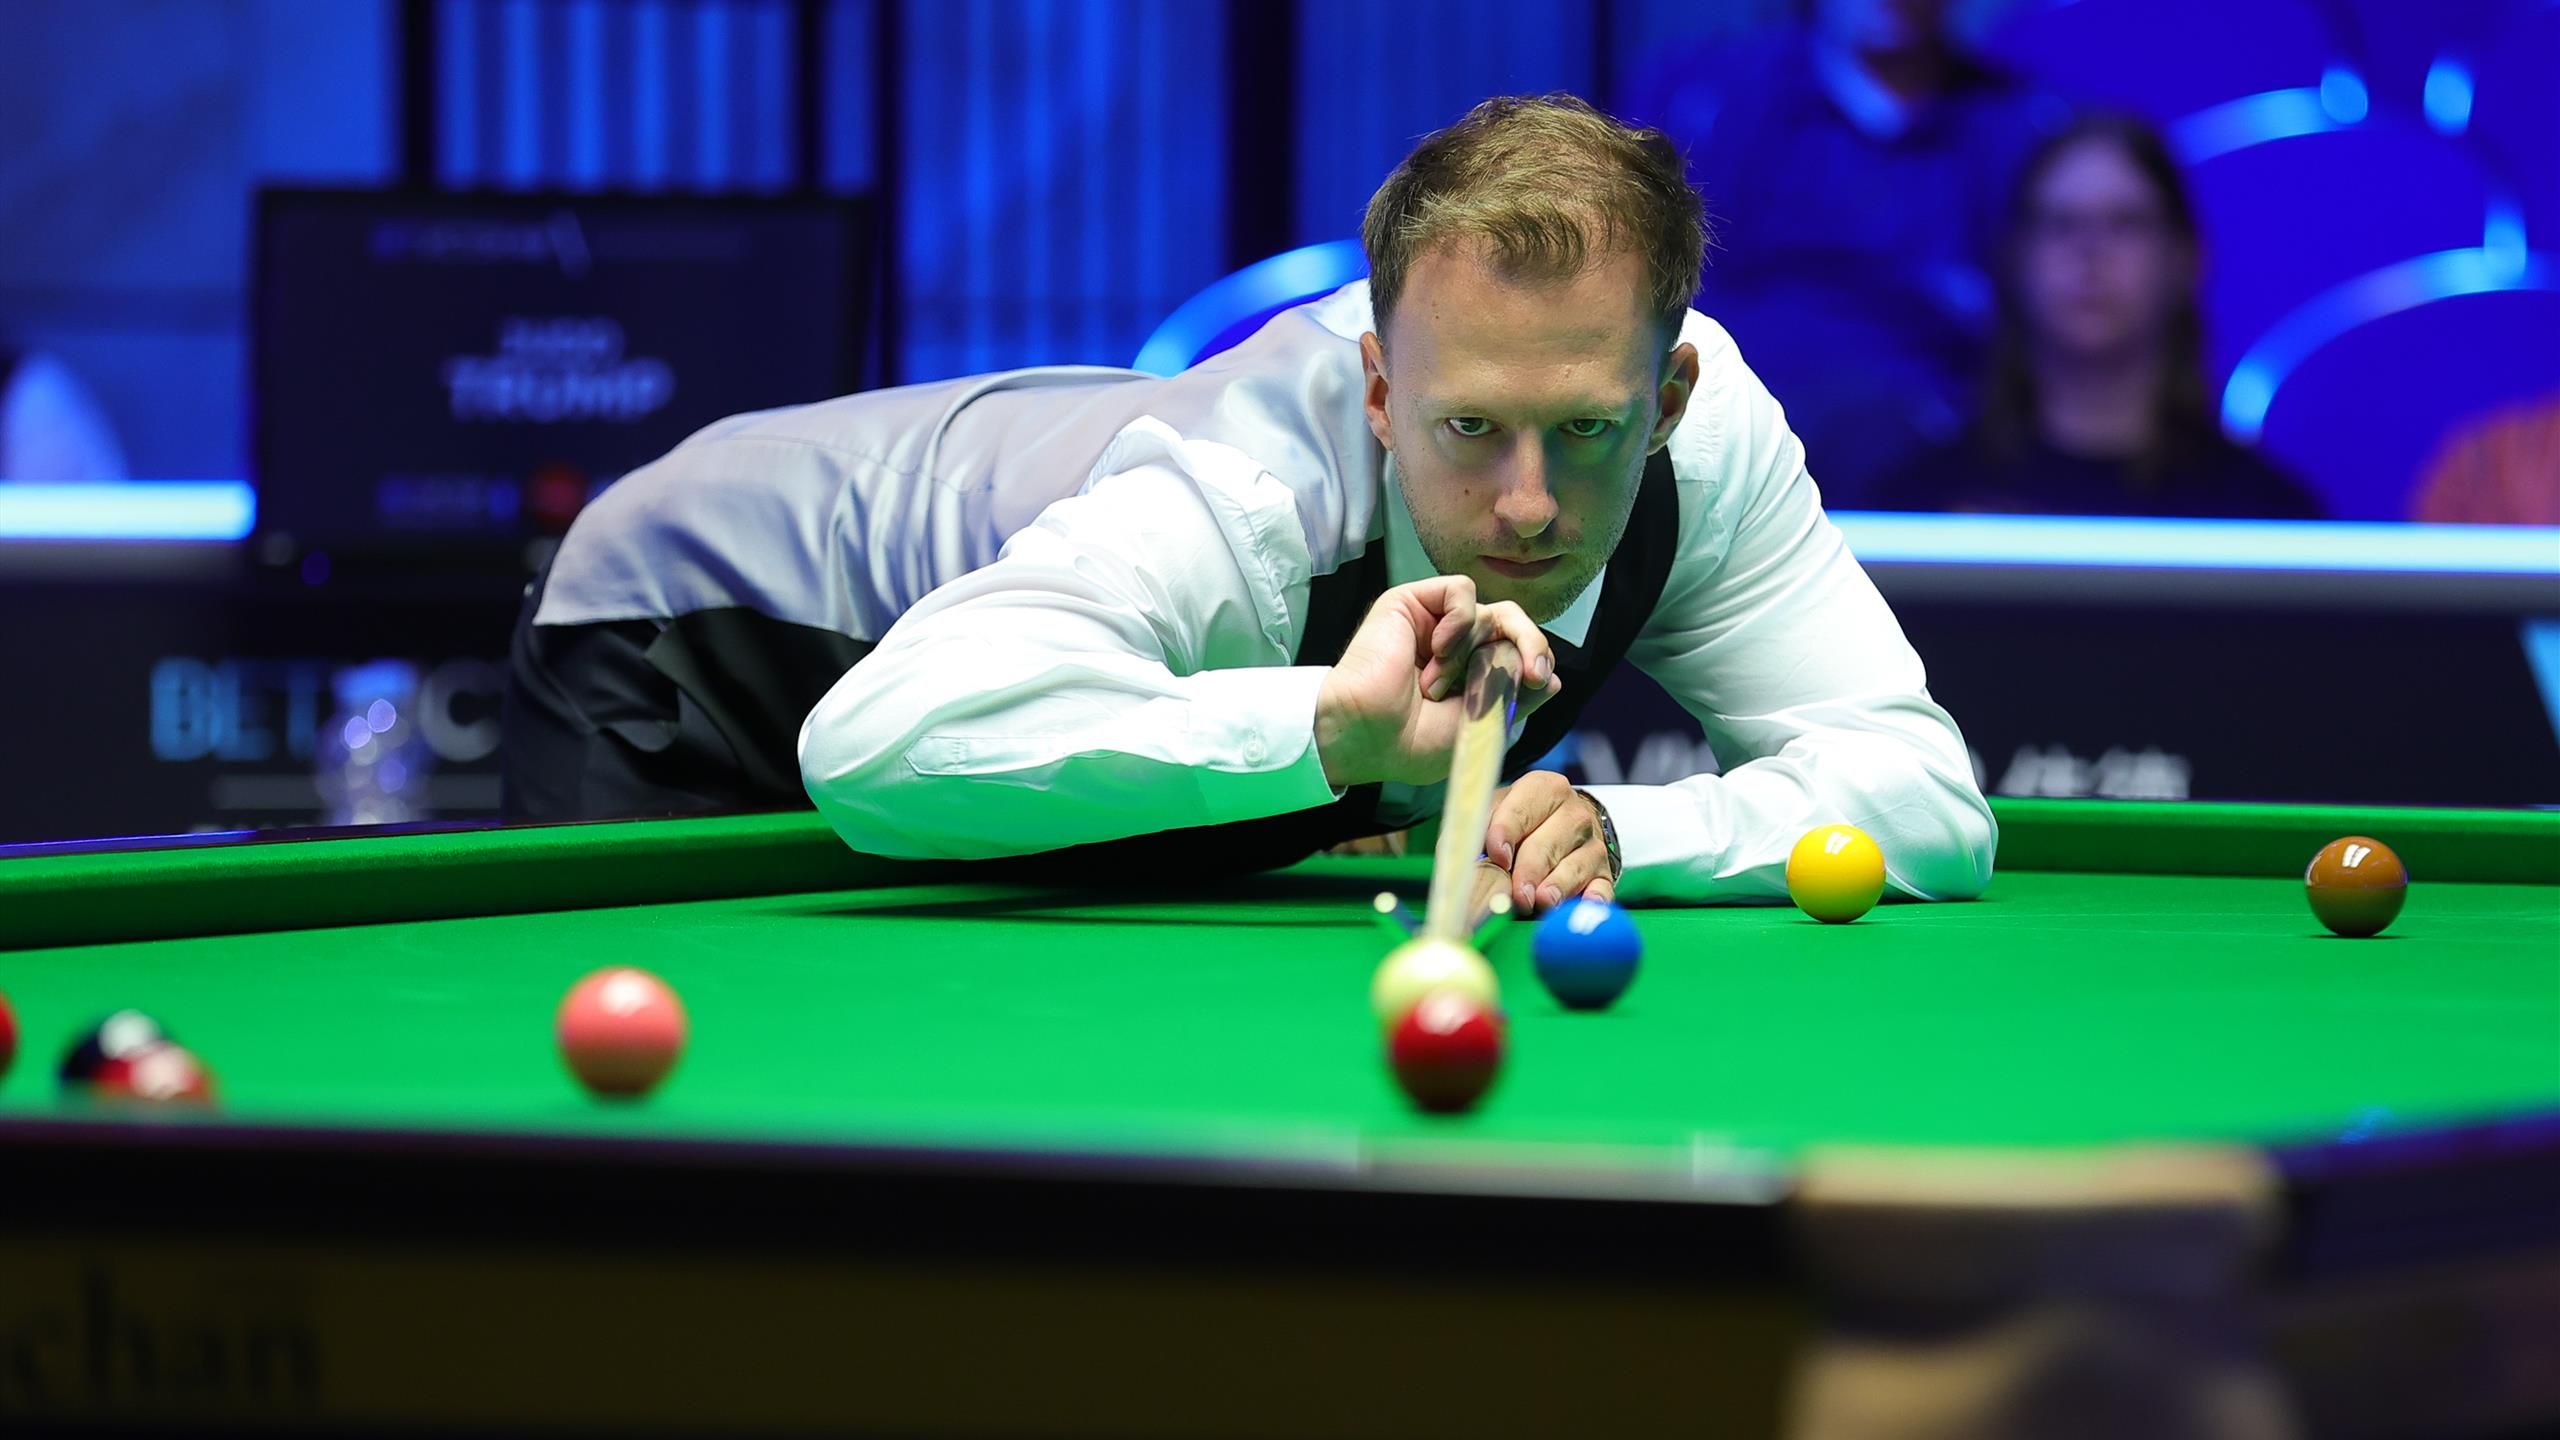 Judd Trump sets up last-16 clash with Farakh Ajaib at European Masters after win over Andrew Higginson